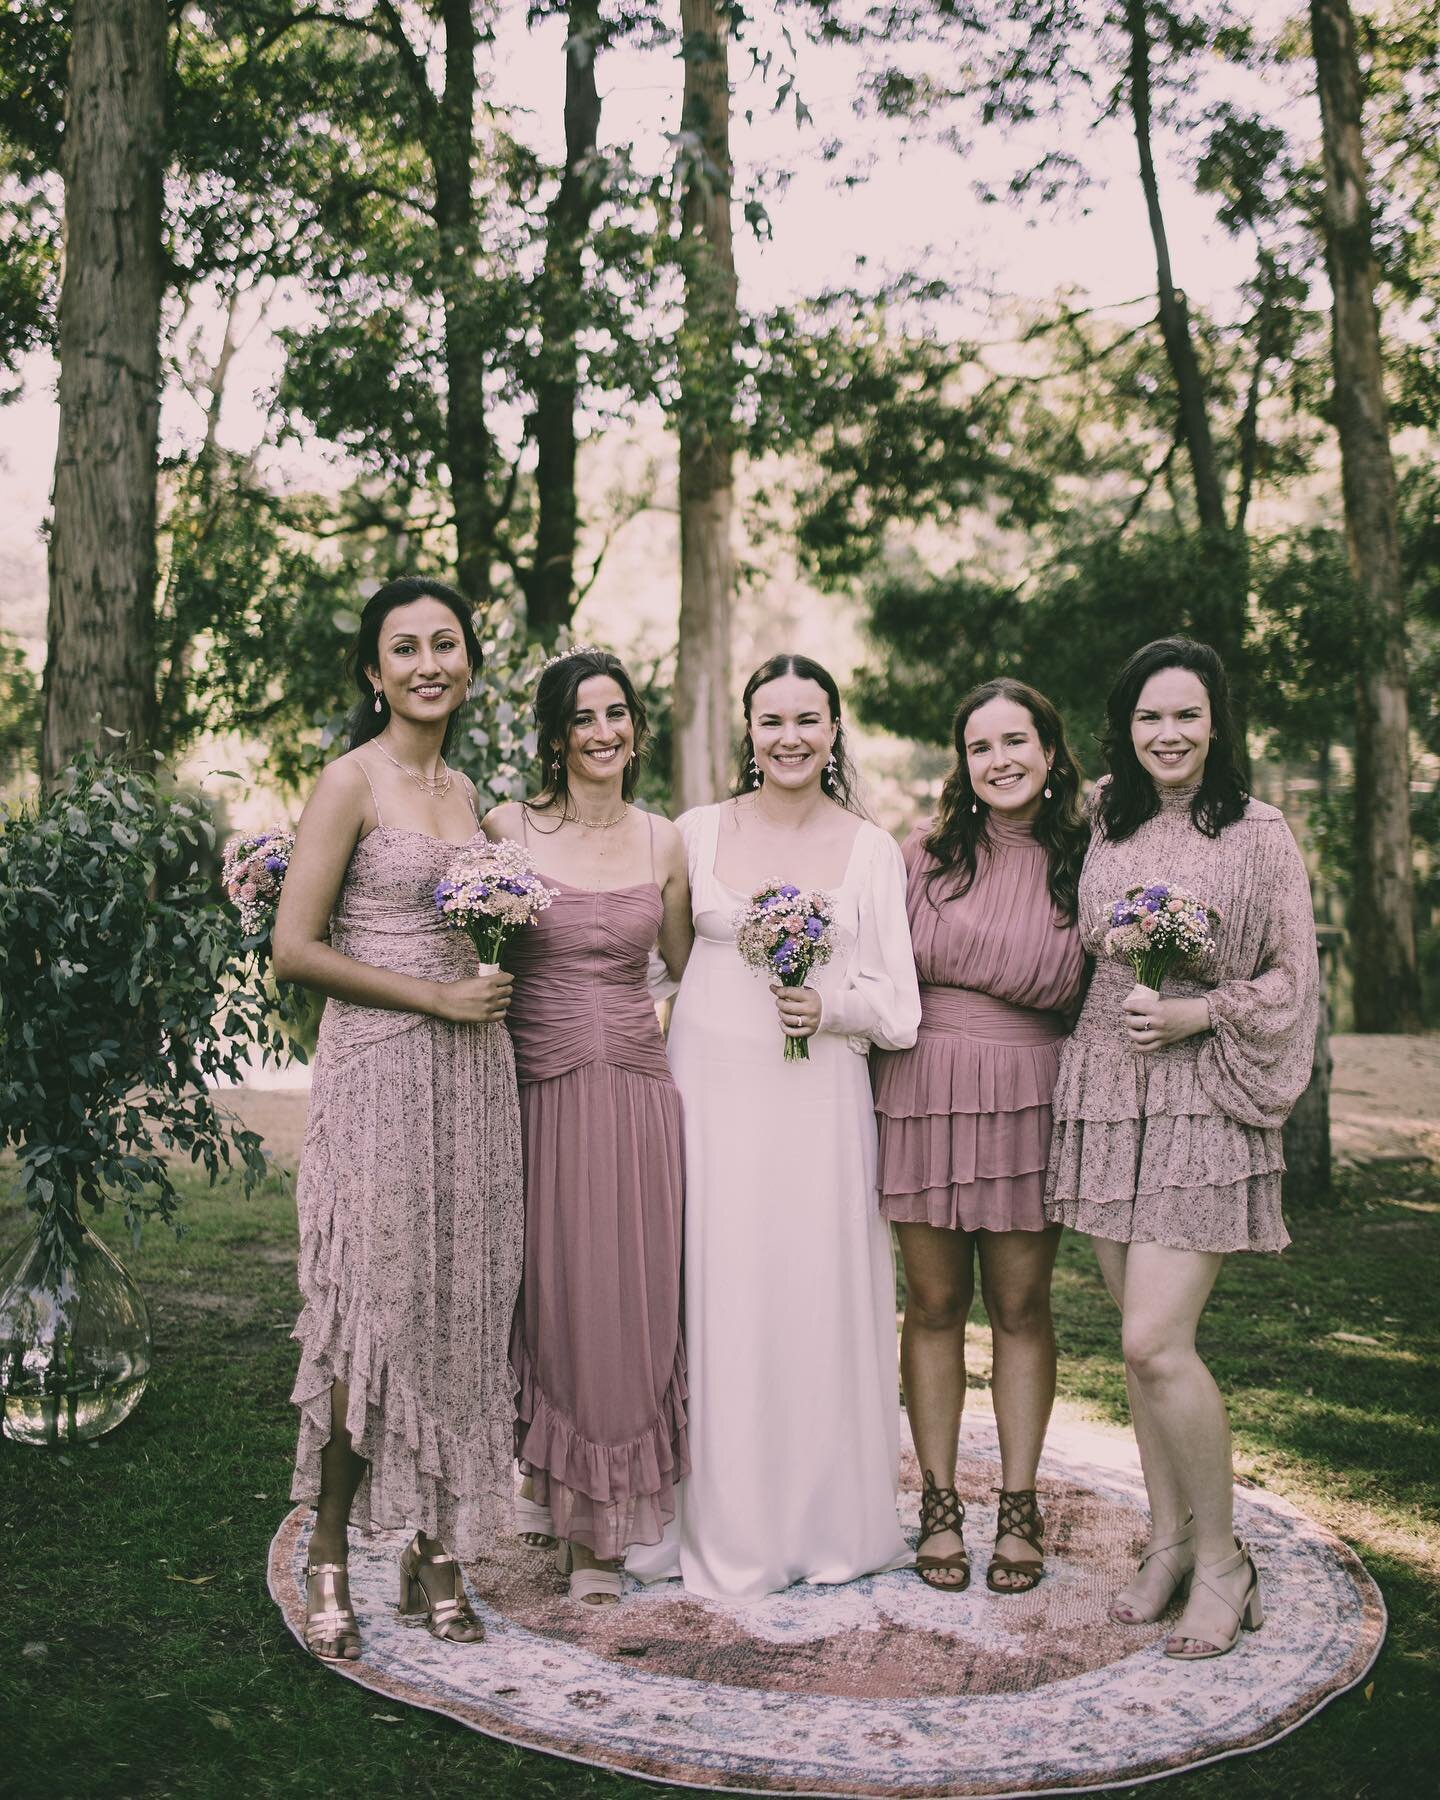 Nadia and her lovely bridesmaids. Thanks to all these beautiful beings for their kind support and assistance on the beautiful wedding day.